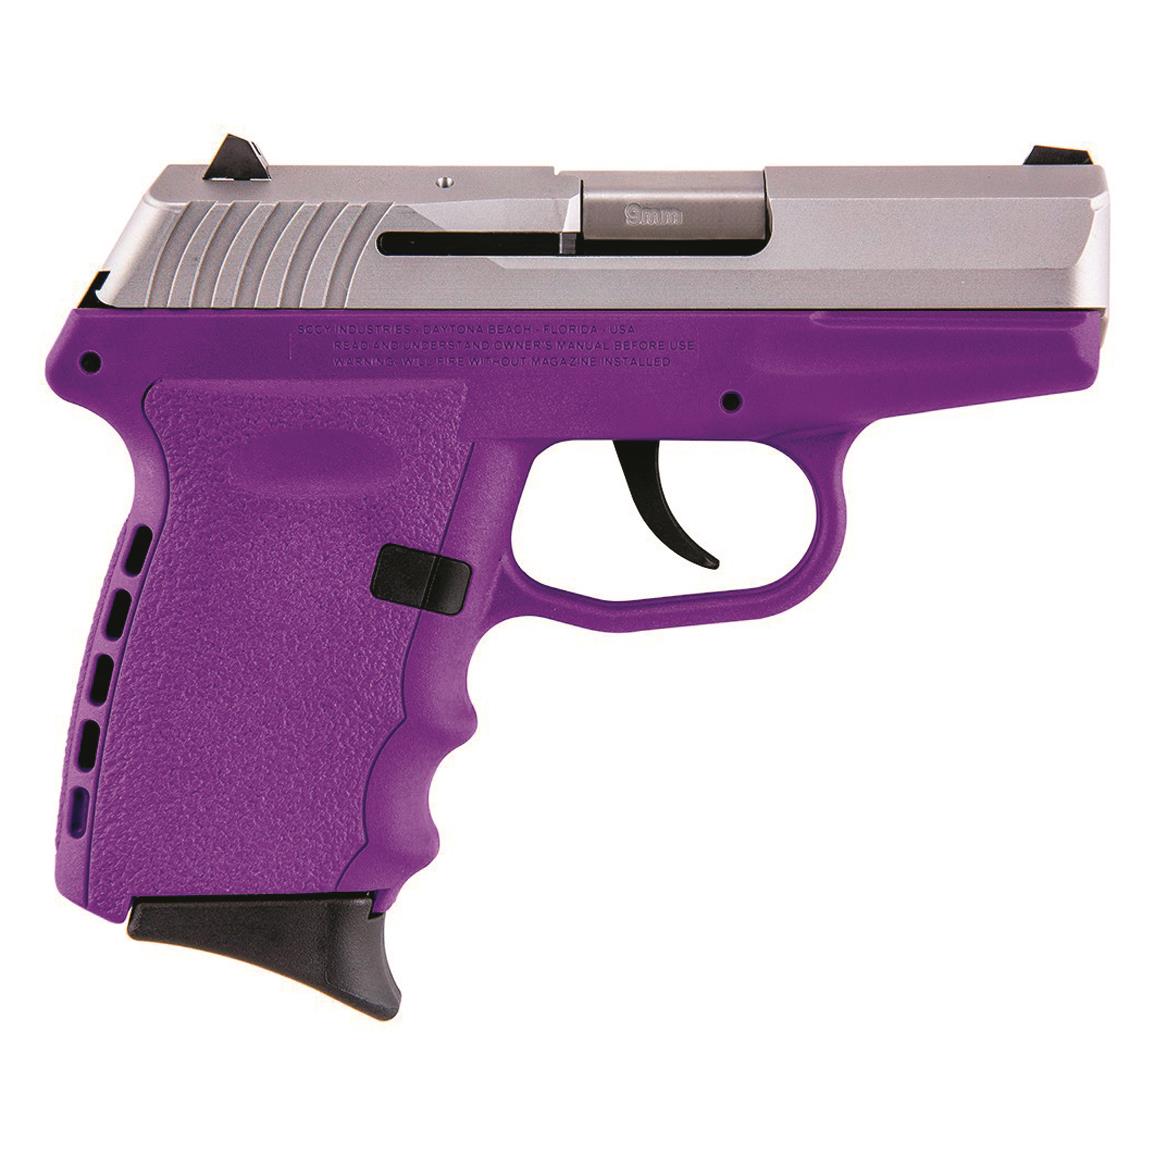 SCCY CPX-2, Semi-automatic, 9mm, 3.1" Barrel, Purple/Stainless, 10+1 Rounds